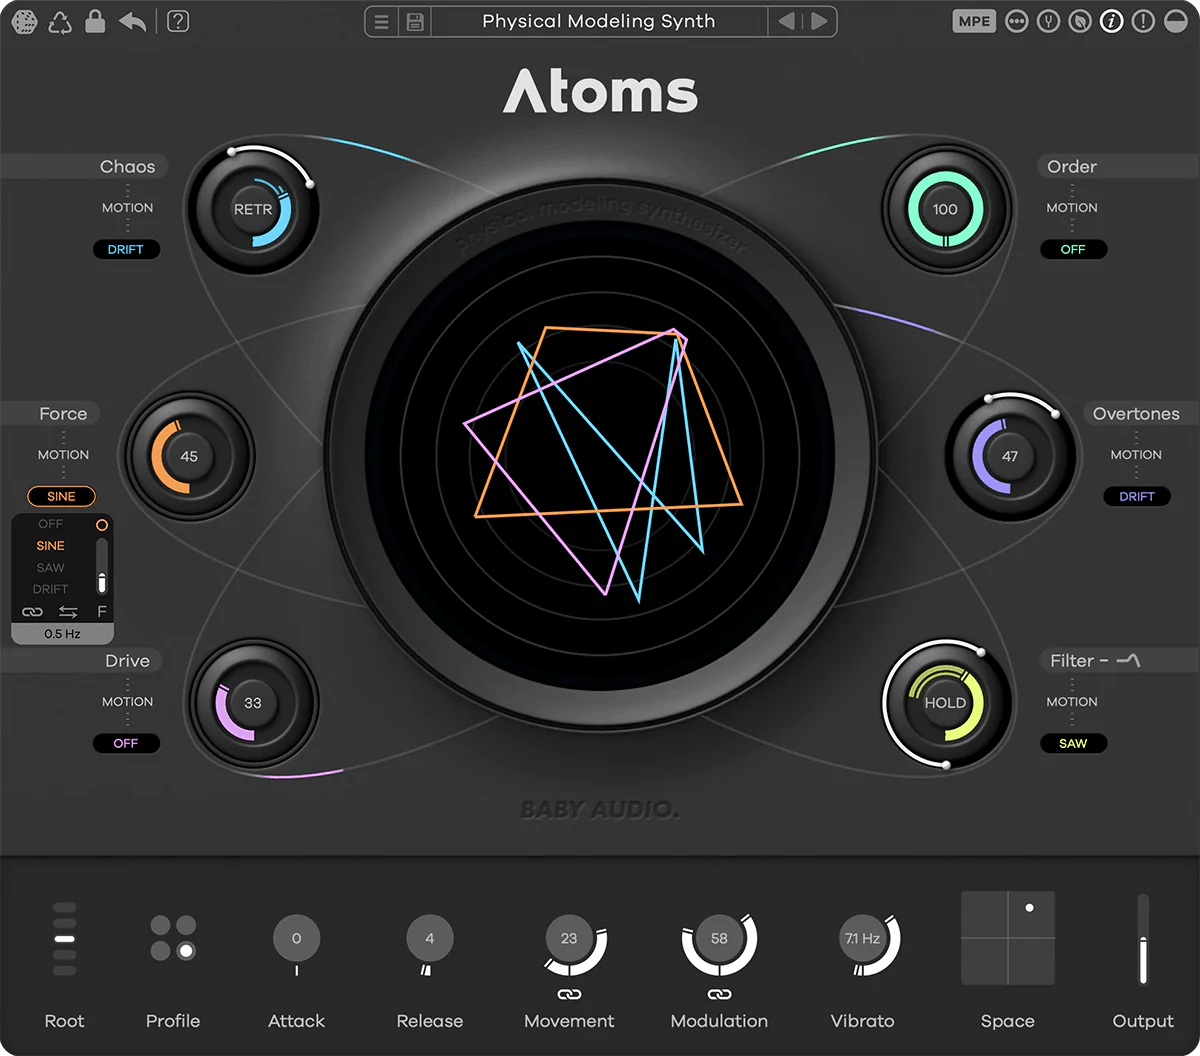 Atoms by Baby Audio